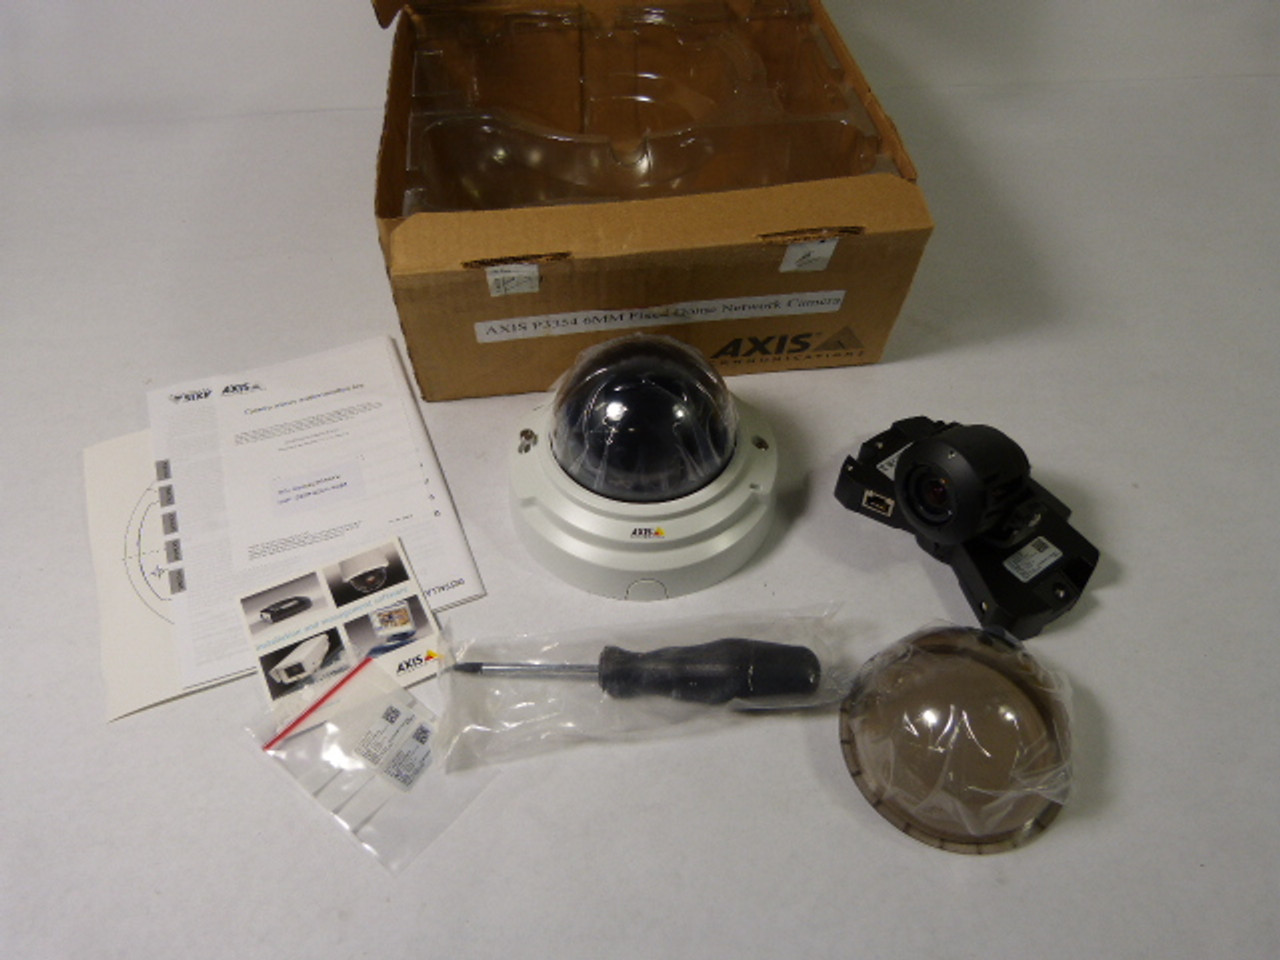 Axis 0369/001/P3354 Network Security Dome Camera *Incomplete Kit* ! NEW !